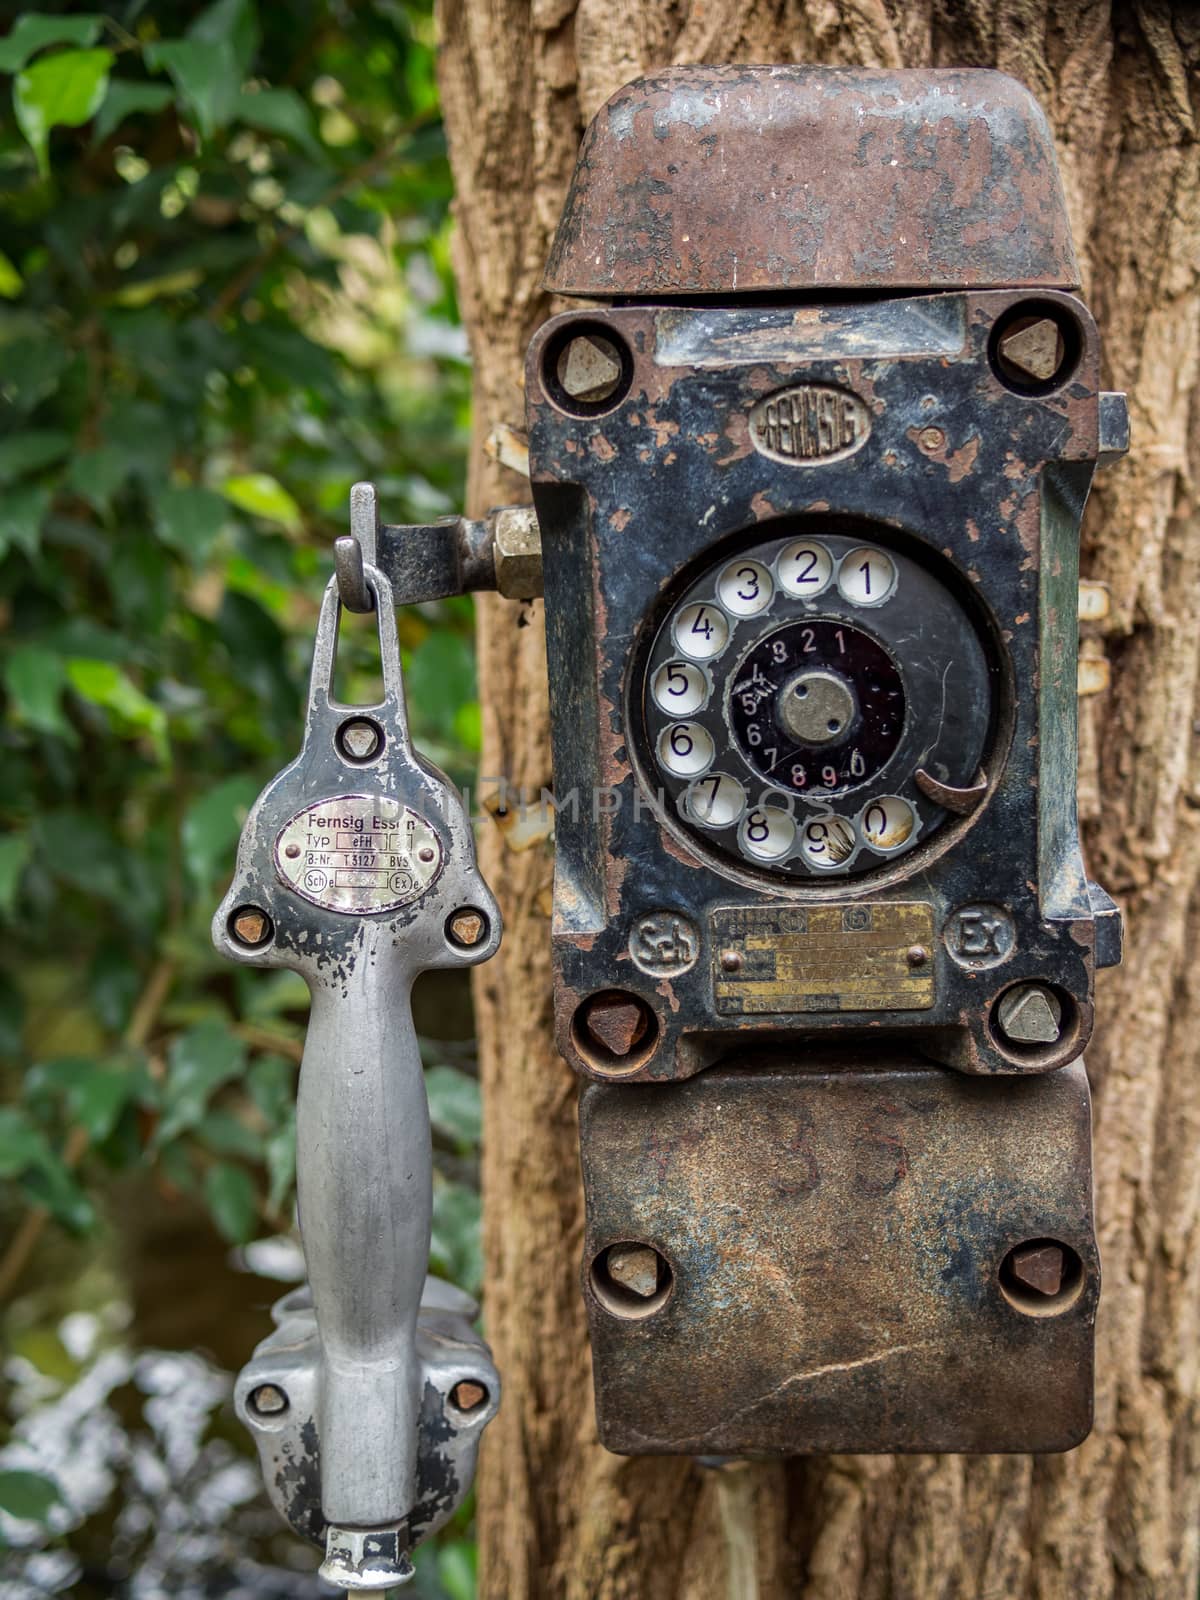 Closeup of an antique telephone hanging on a tree